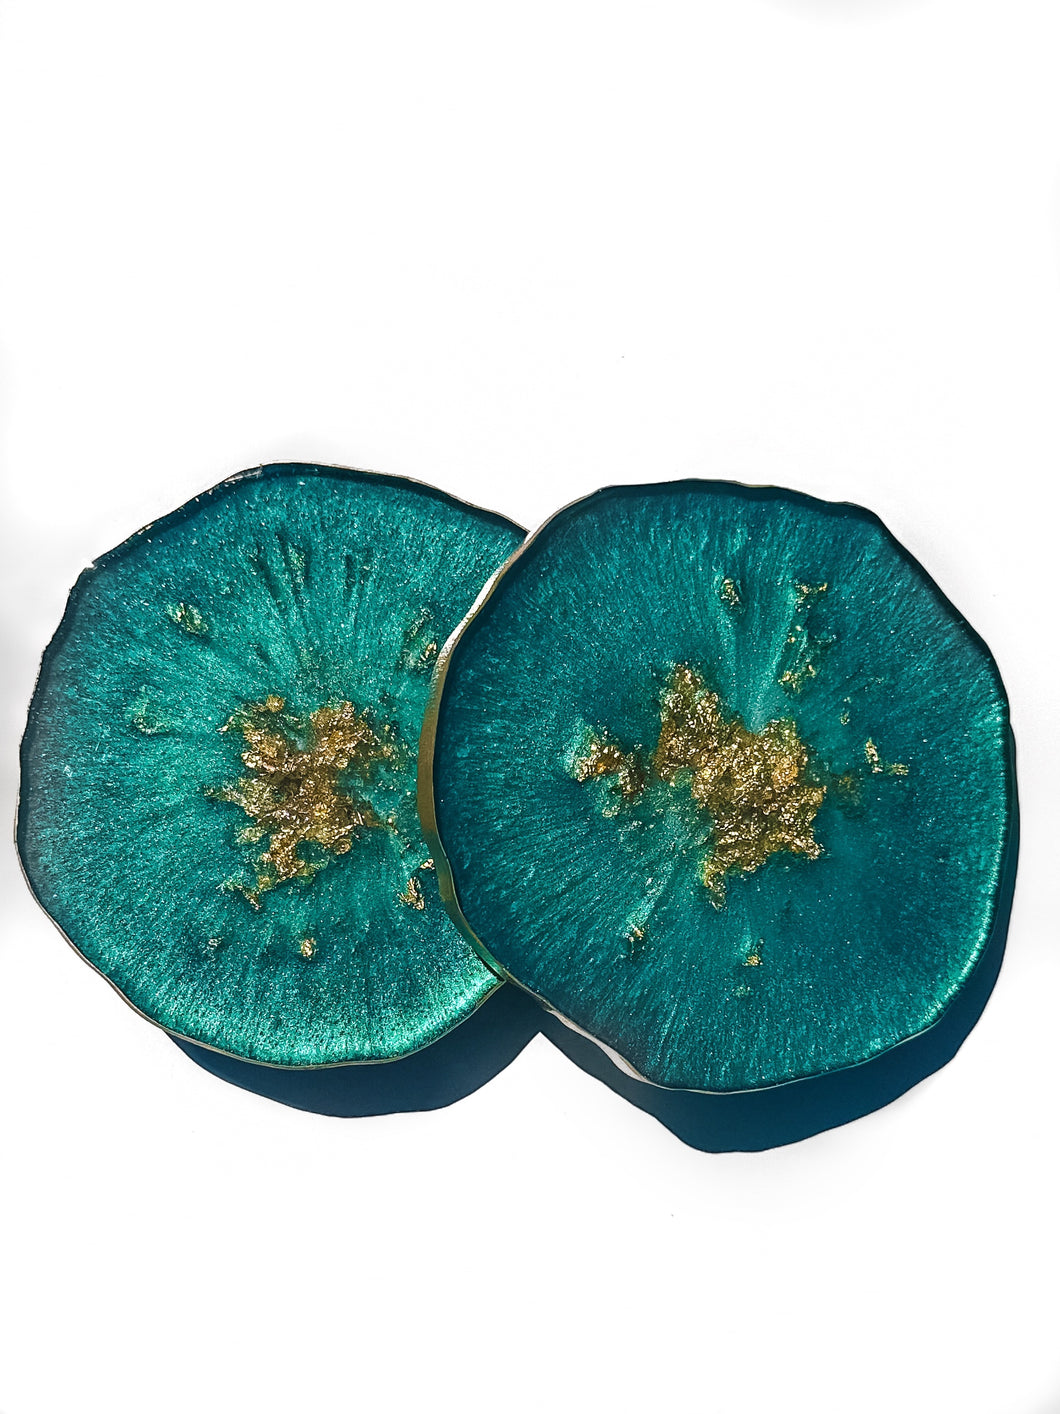 Set of Two Medium Turquoise Green & Gold Coasters